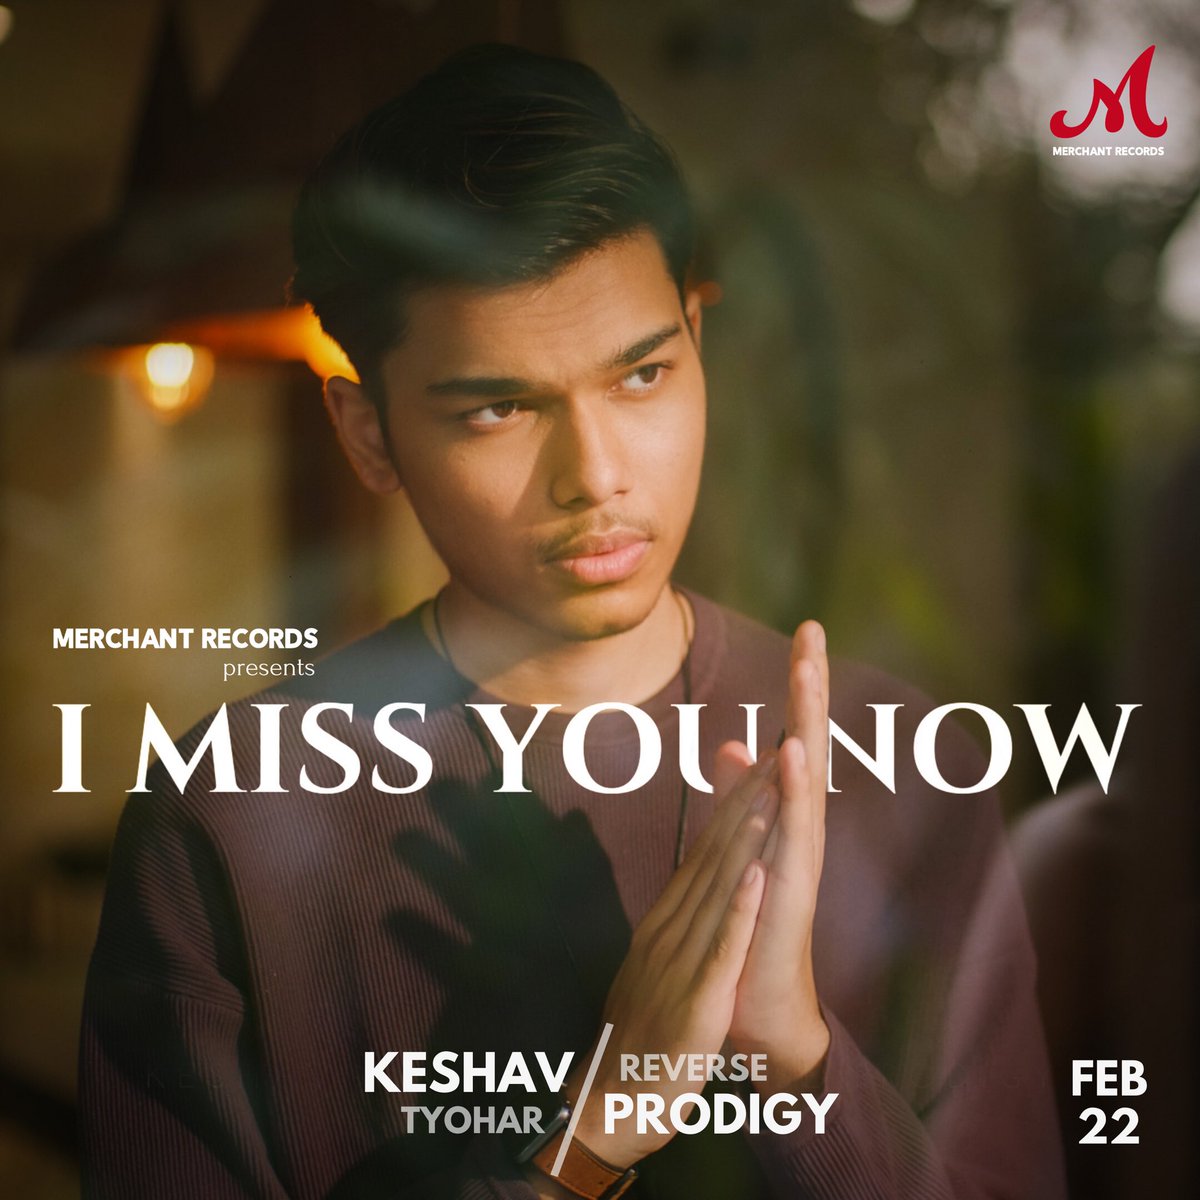 Our first English single on @MerchantRec is here! 
I MISS YOU NOW by @keshavtyohar releases on 22nd Feb

@SlimSulaiman #MerchantRecords